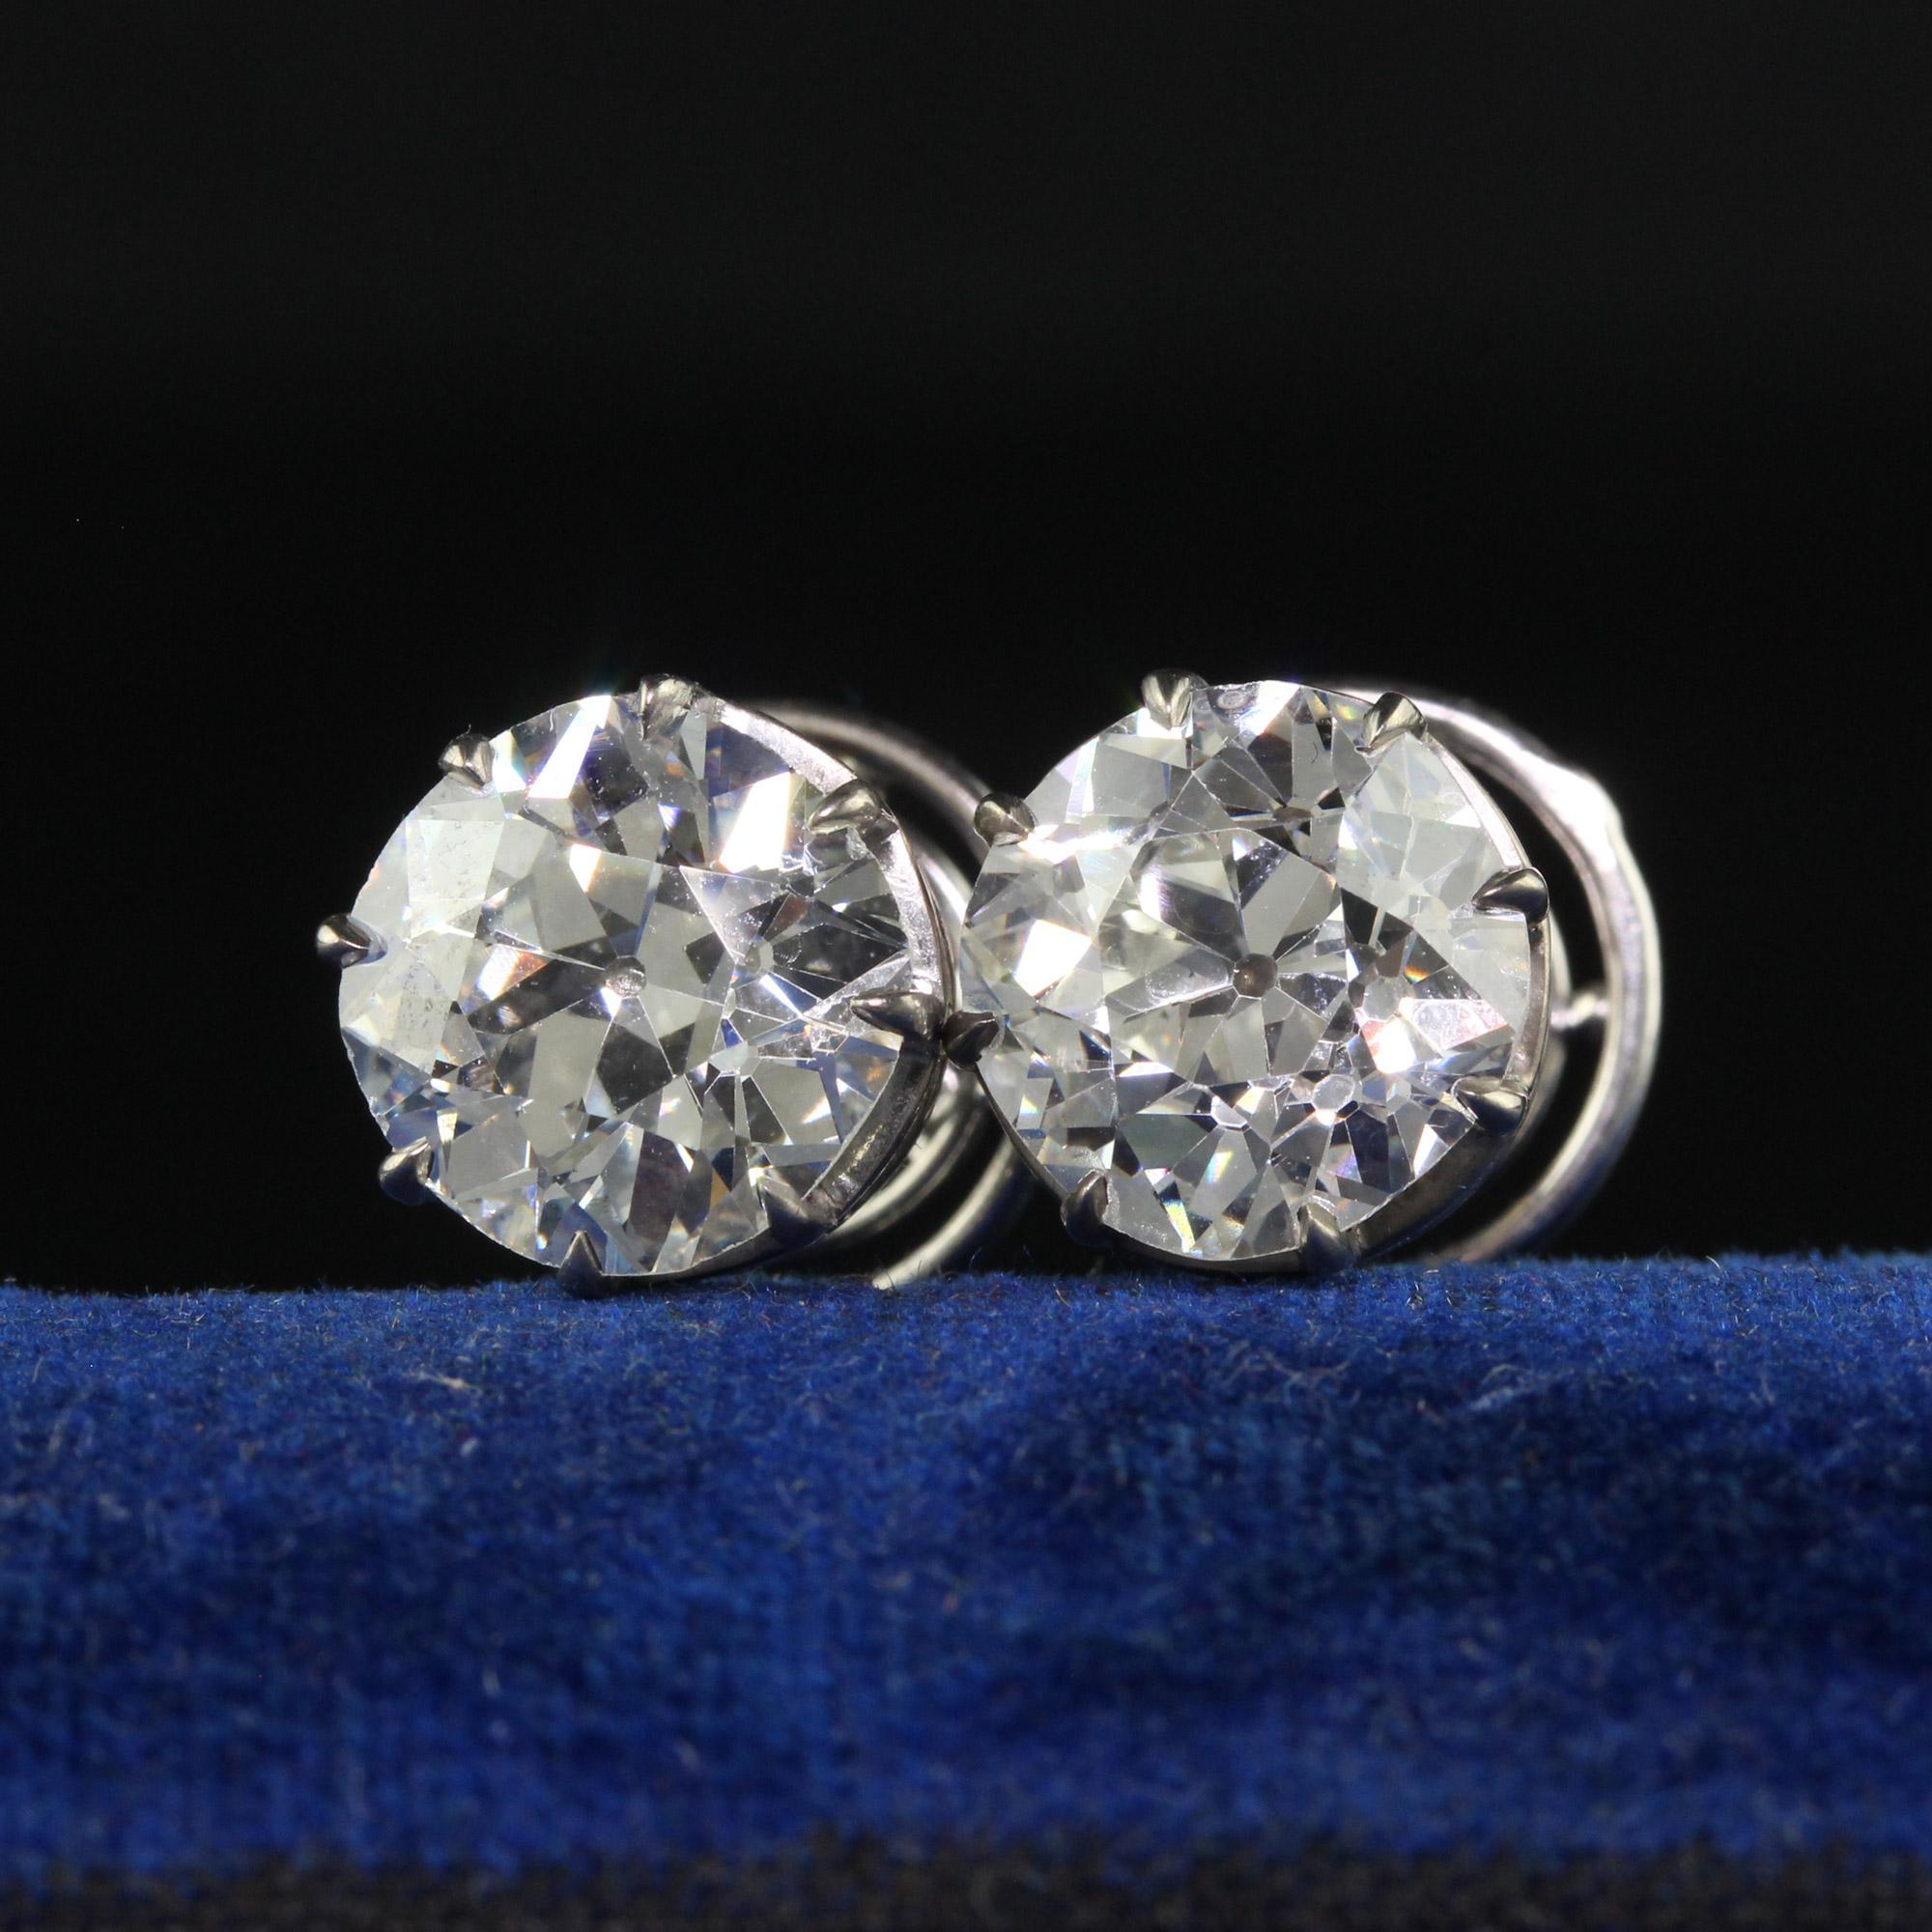 Antique Art Deco Platinum Old European Diamond Stud Earrings - GIA In Good Condition For Sale In Great Neck, NY